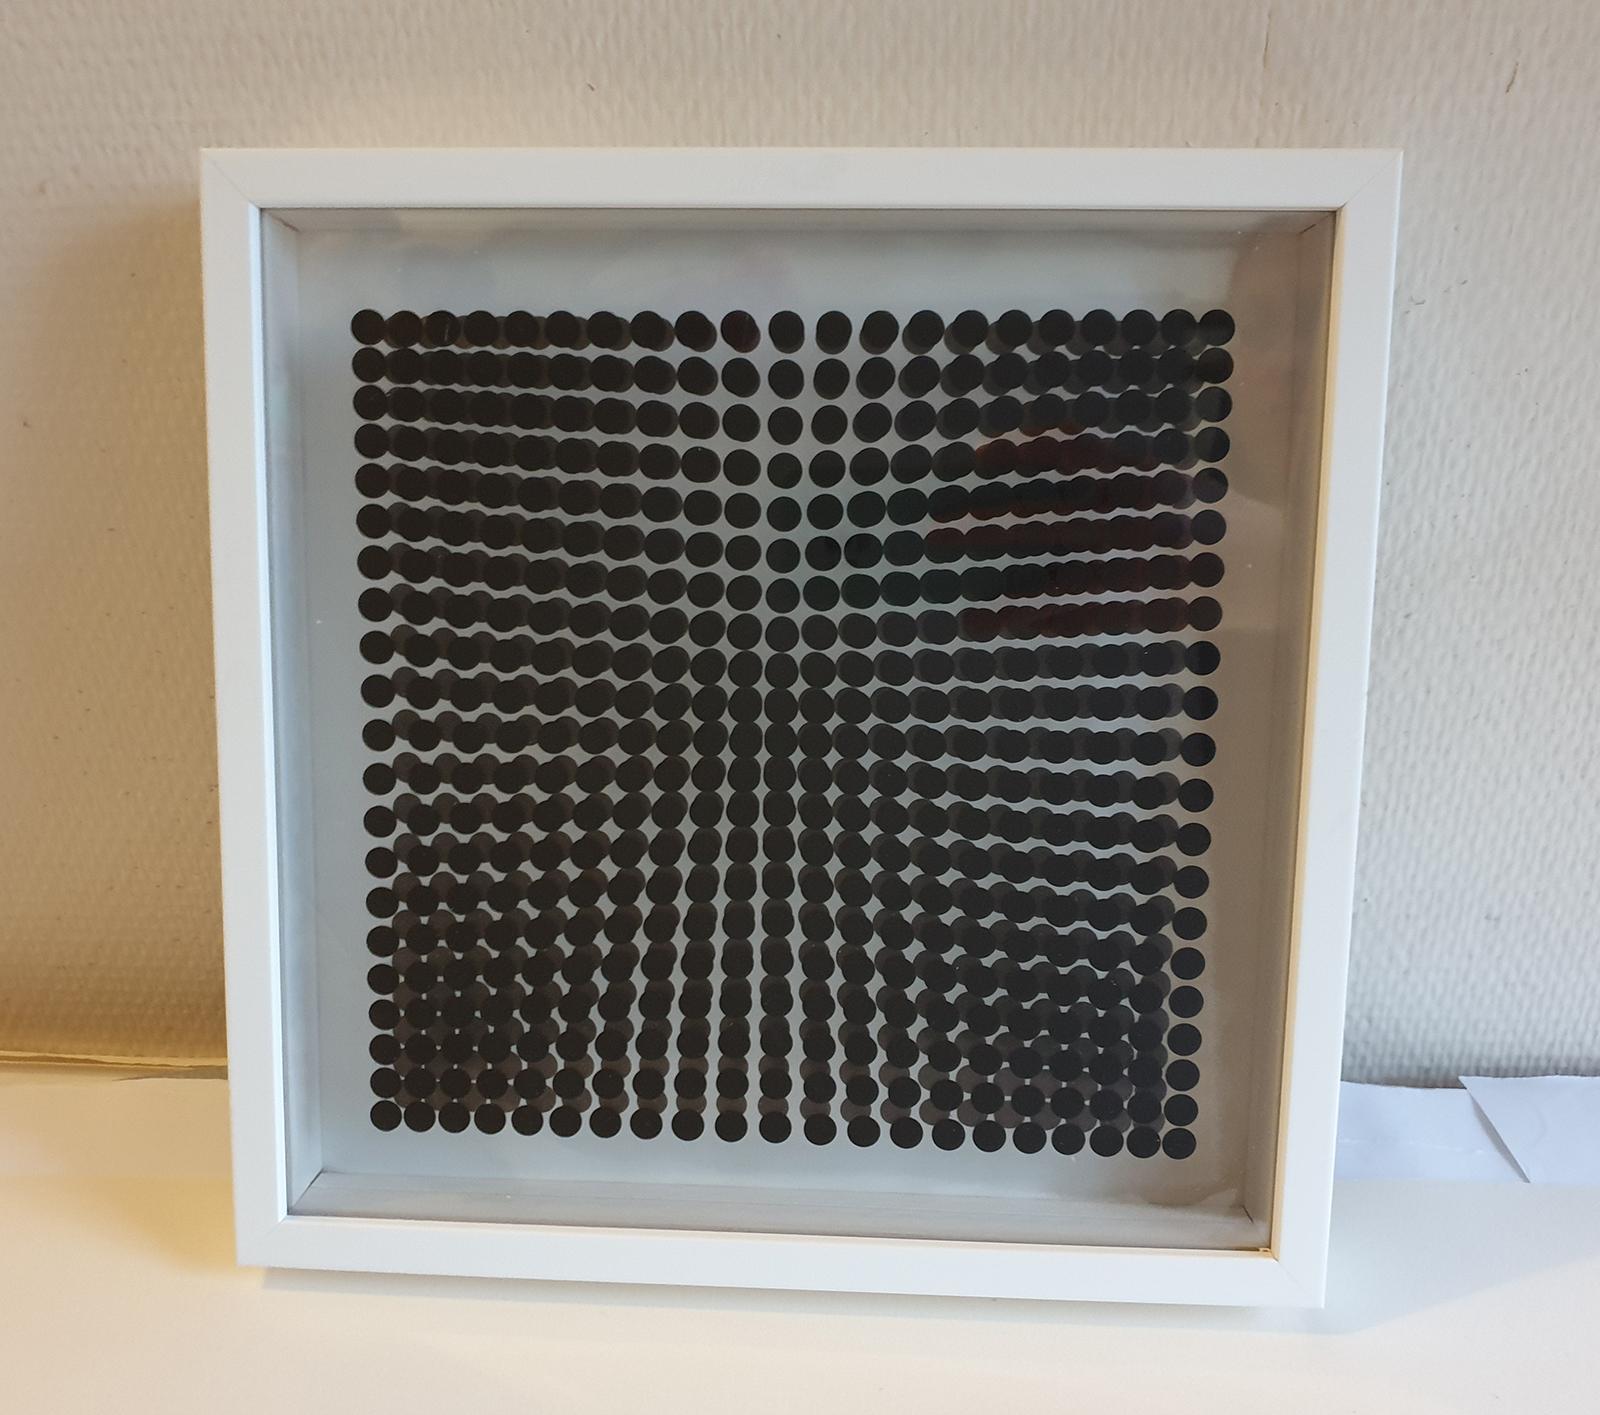 Victor Vasarely
Kinetics B

From serie : Kinetics A/ B/ C/ D
double screen print on rhodoid and cardboard
editions of the griffon
neuchatel (switzerland)
1st edition . 1973
white wood frame
perfect condition
very nice kinetic effect by superimposing